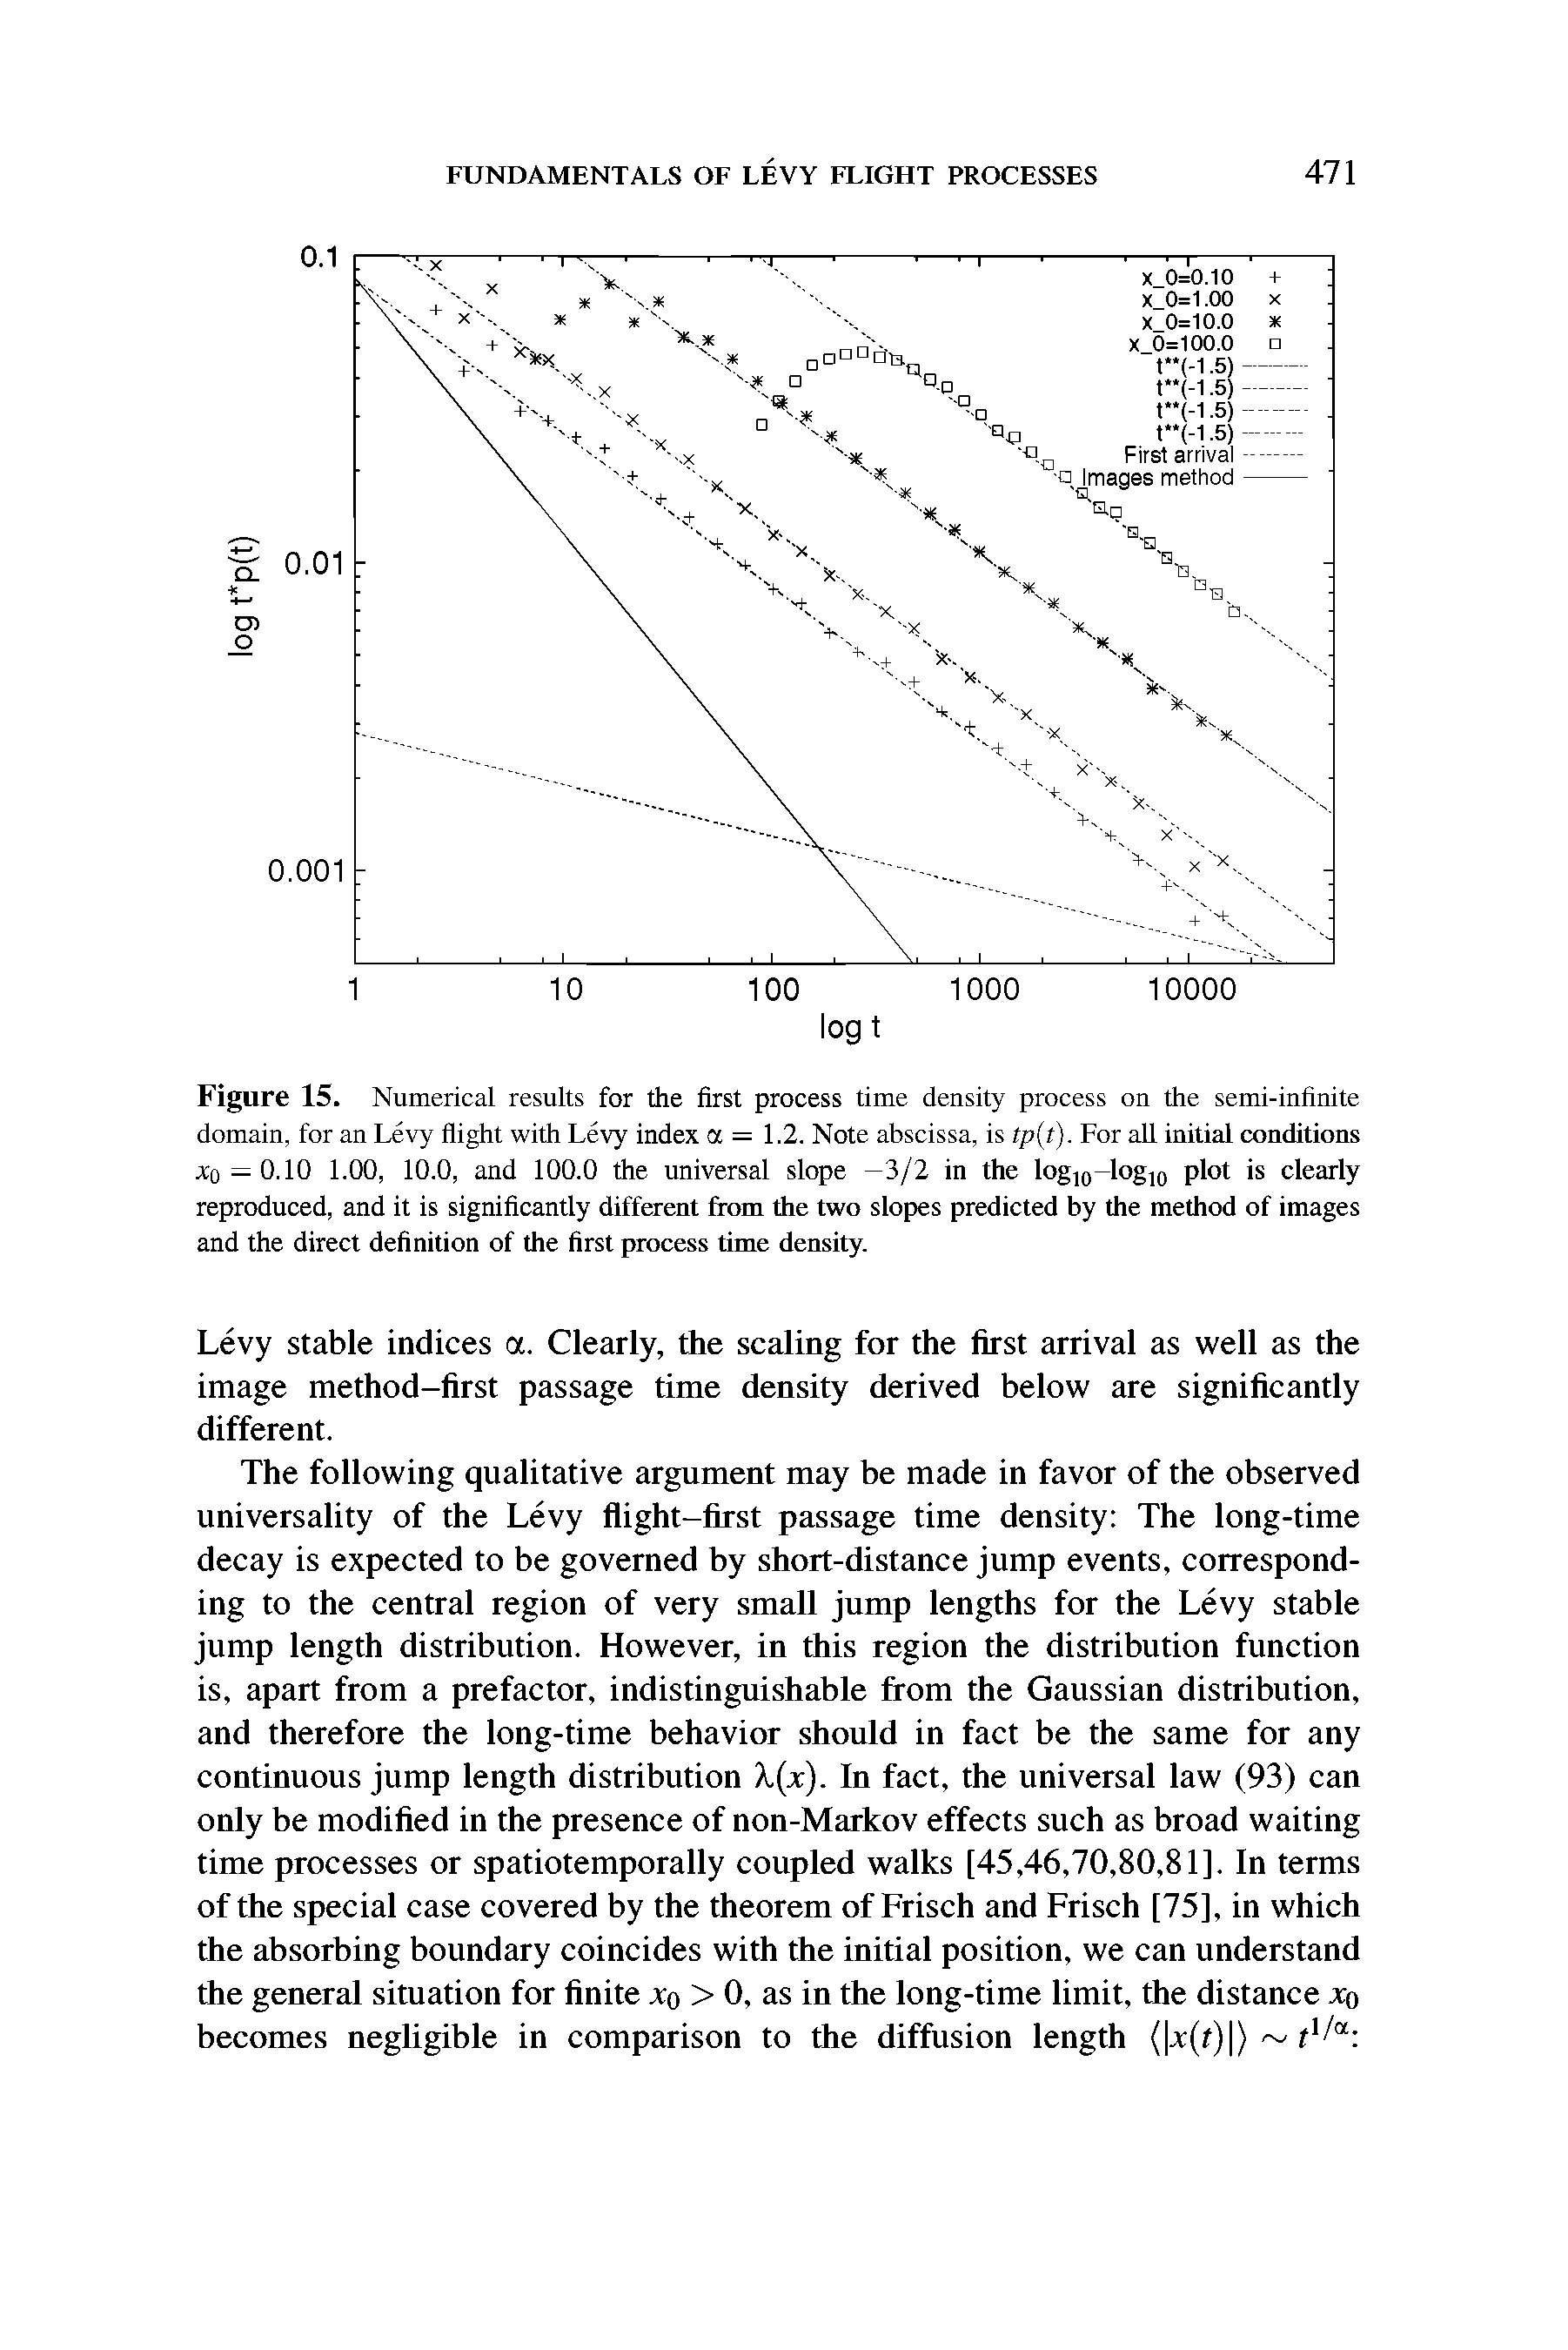 Figure 15. Numerical results for the first process time density process on the semi-infinite domain, for an Levy flight with Levy index a = 1.2. Note abscissa, is tp(t). For all initial conditions. to = 0.10 1.00, 10.0, and 100.0 the universal slope —3/2 in the log10-log10 plot is clearly reproduced, and it is significantly different from the two slopes predicted by the method of images and the direct definition of the first process time density.